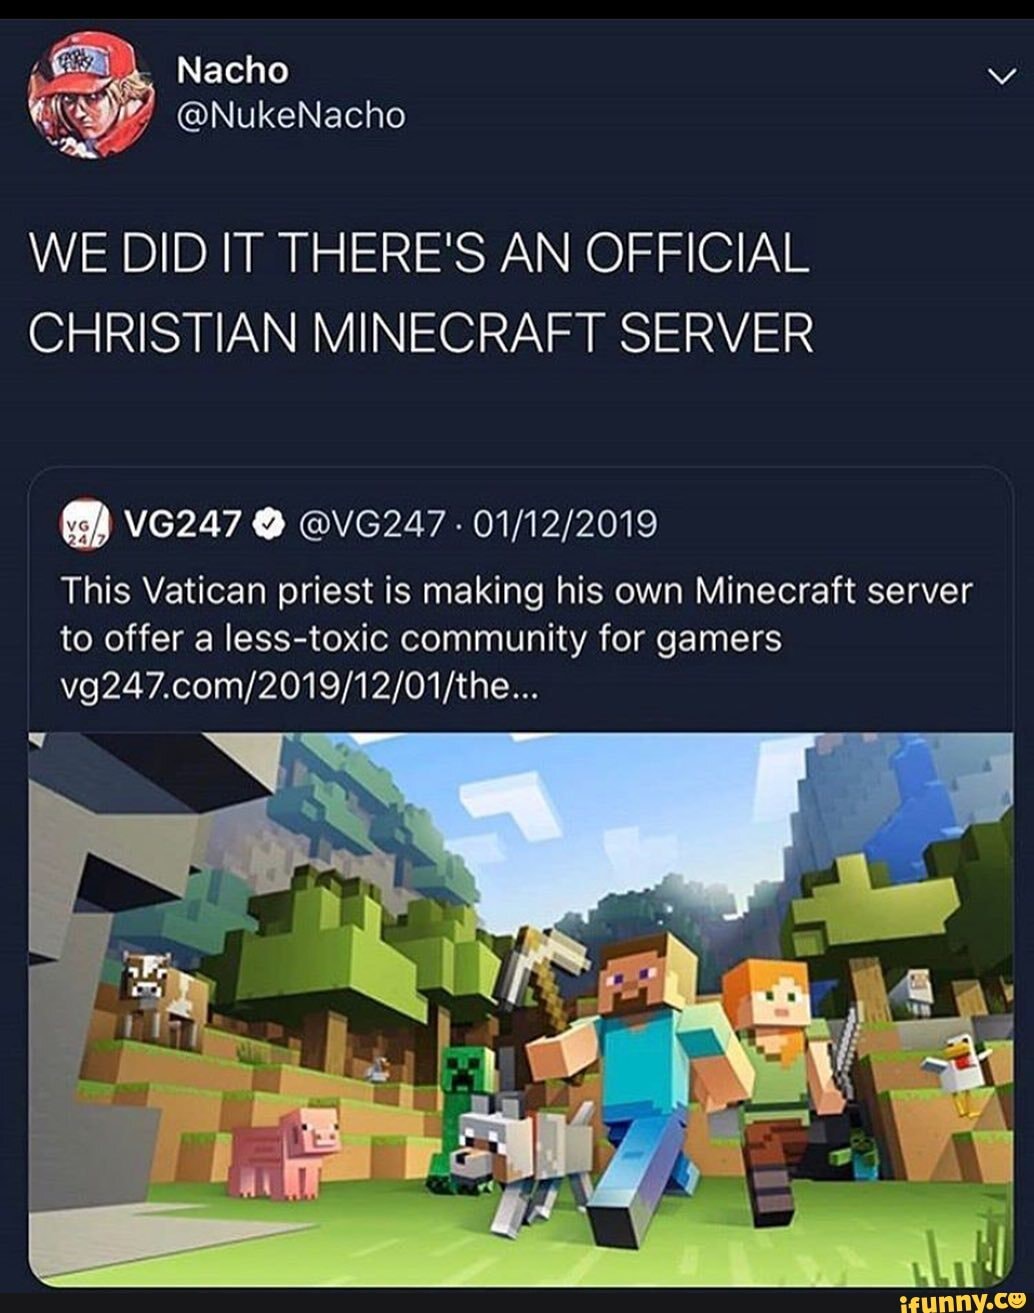 Uplifted Handbook America WE DID IT THERE'S AN OFFICIAL CHRISTIAN MINECRAFT SERVER WA This Vatican  priest is making his own Minecraft server to offer a less-toxic community  for gamers vg247.com/2019/12/01/the... - )